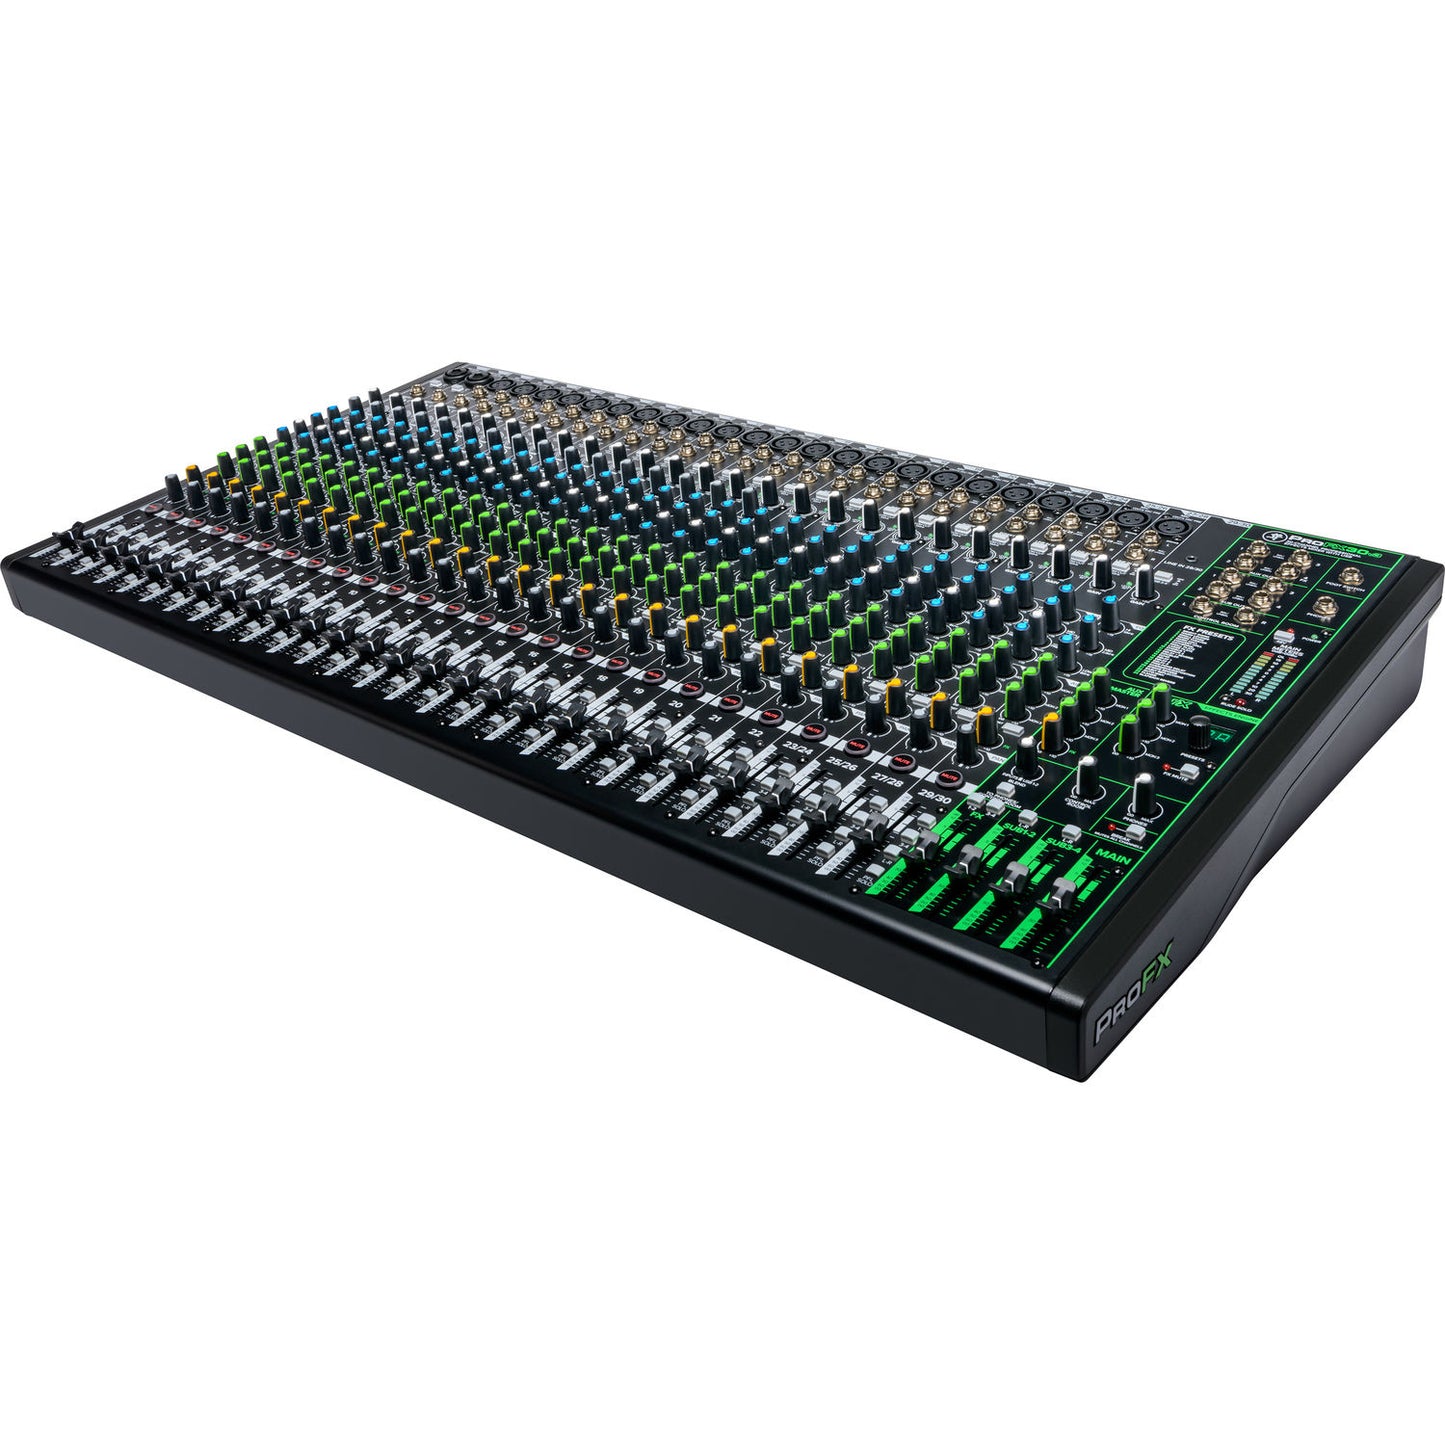 Mackie ProFX30v3 30-Channel Sound Reinforcement Mixer with USB & Effects